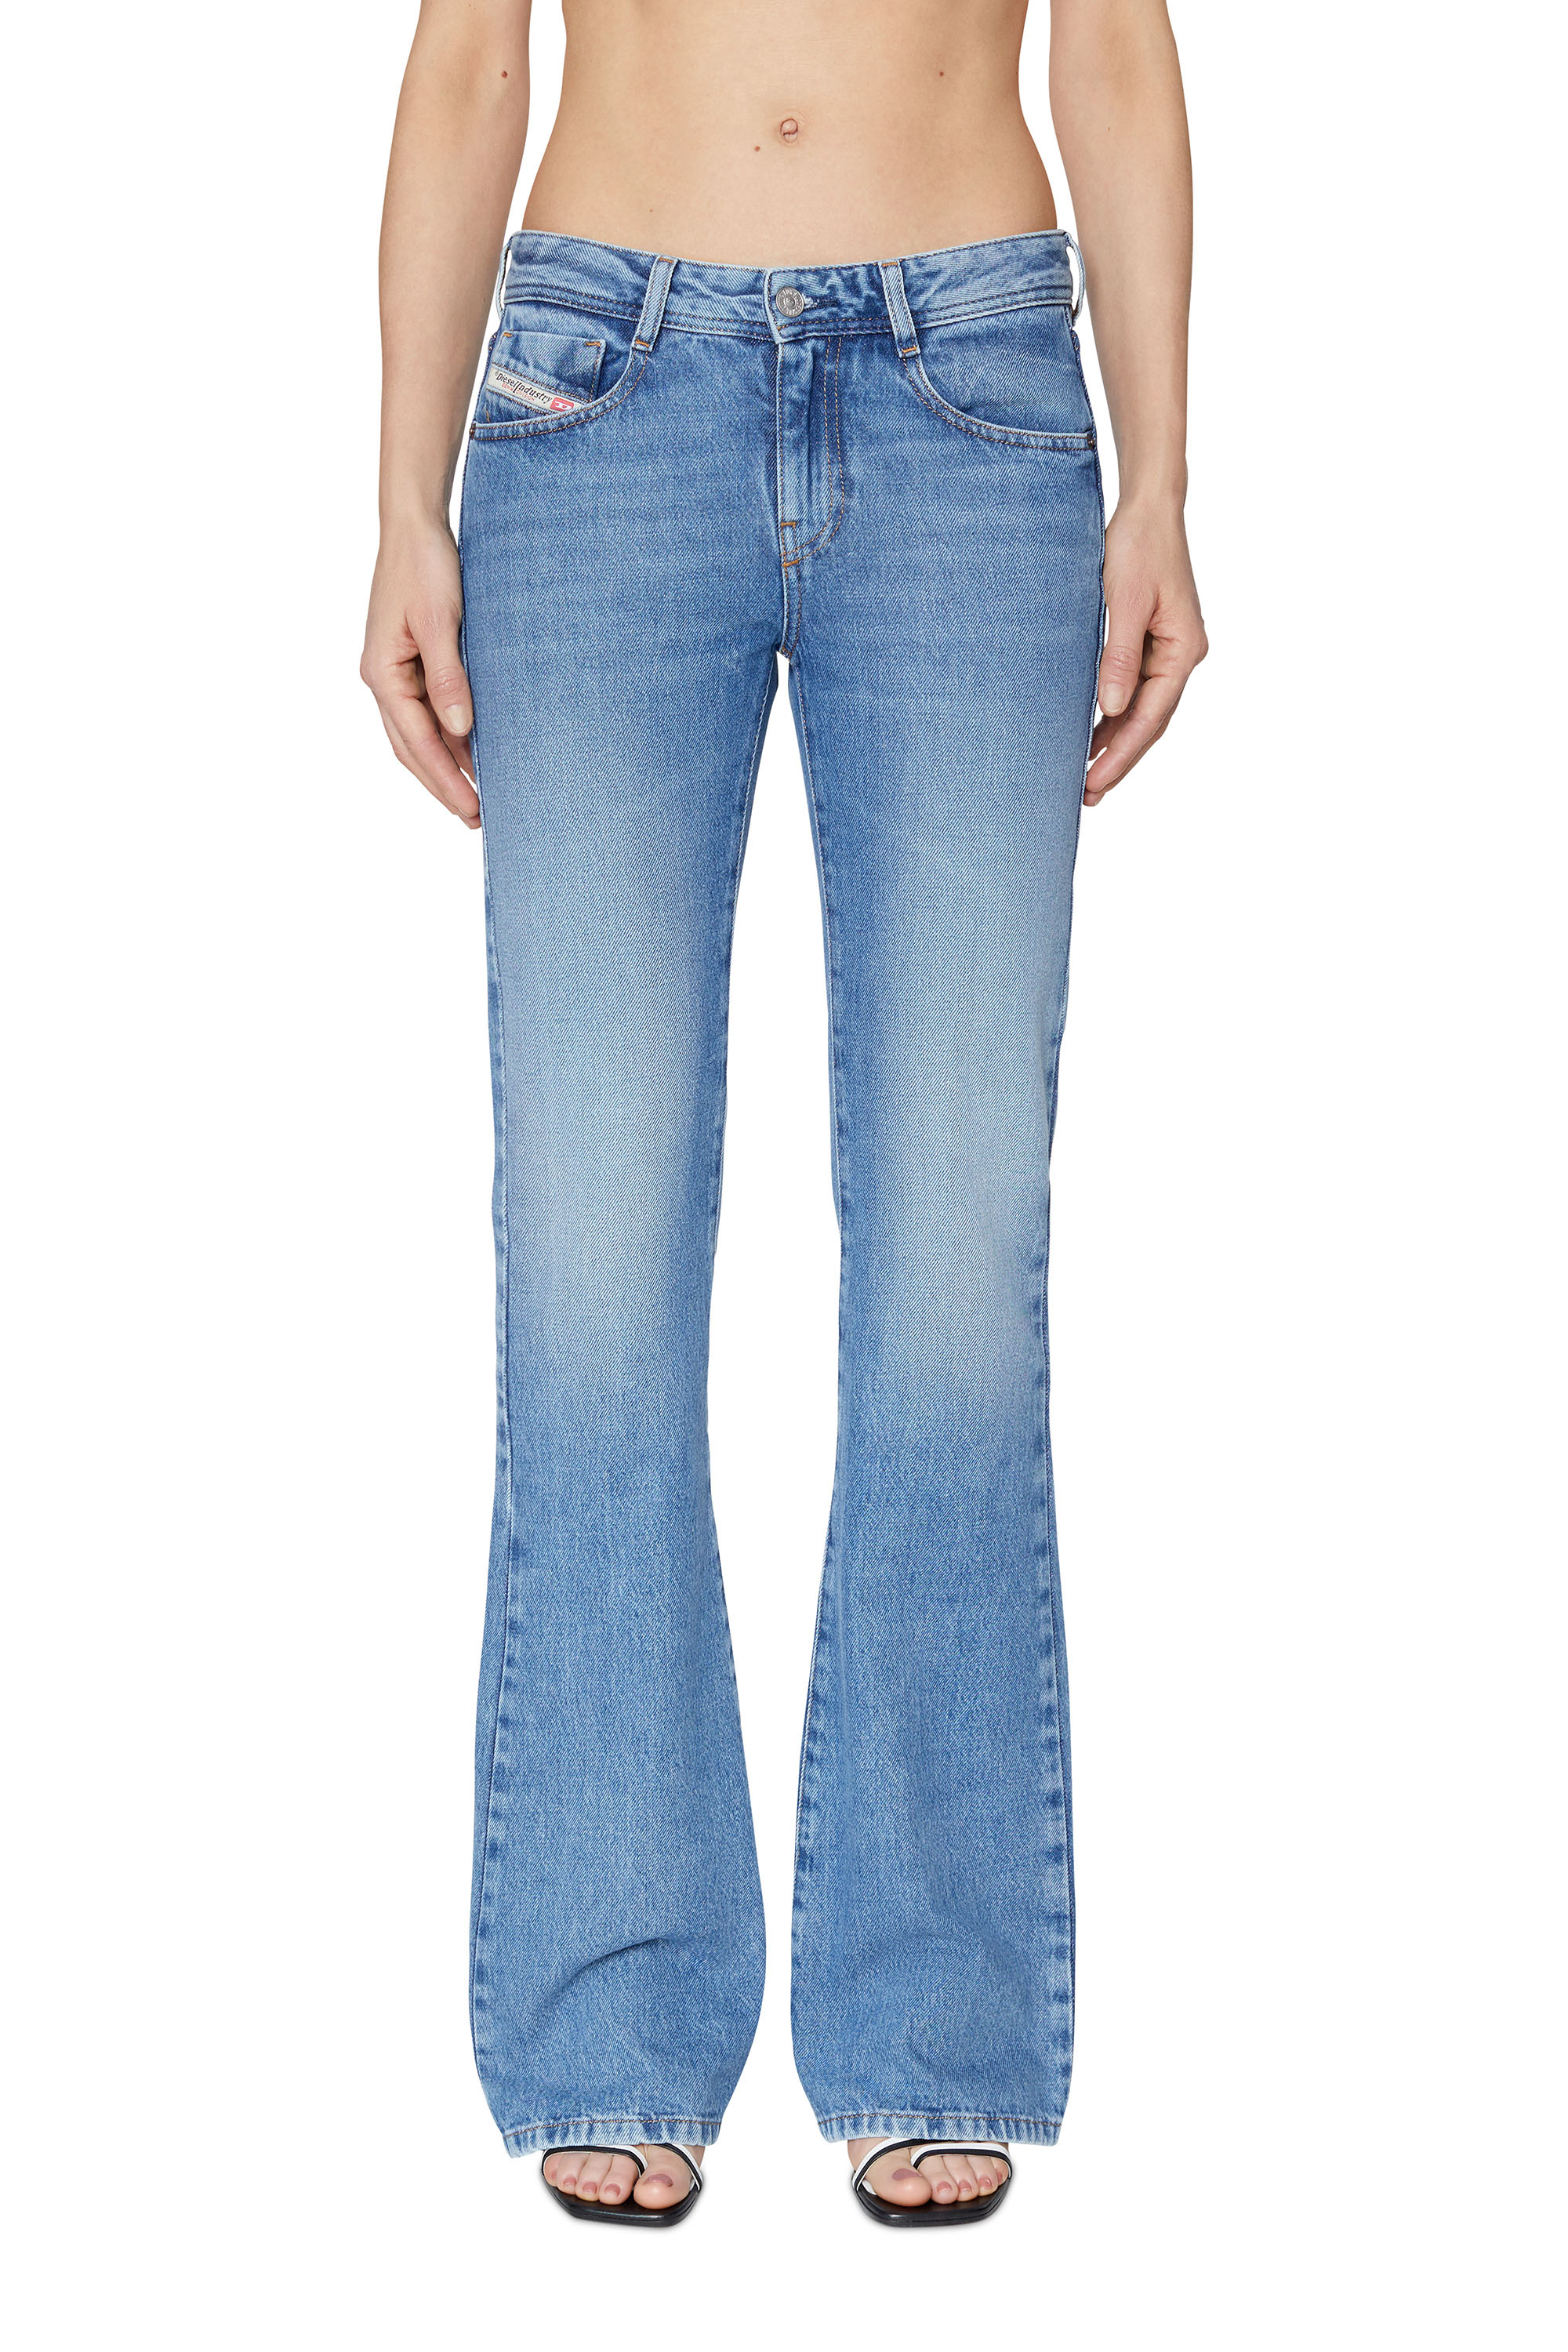 1969 D-EBBEY 09C16 Bootcut and Flare Jeans, Azul medio - Vaqueros